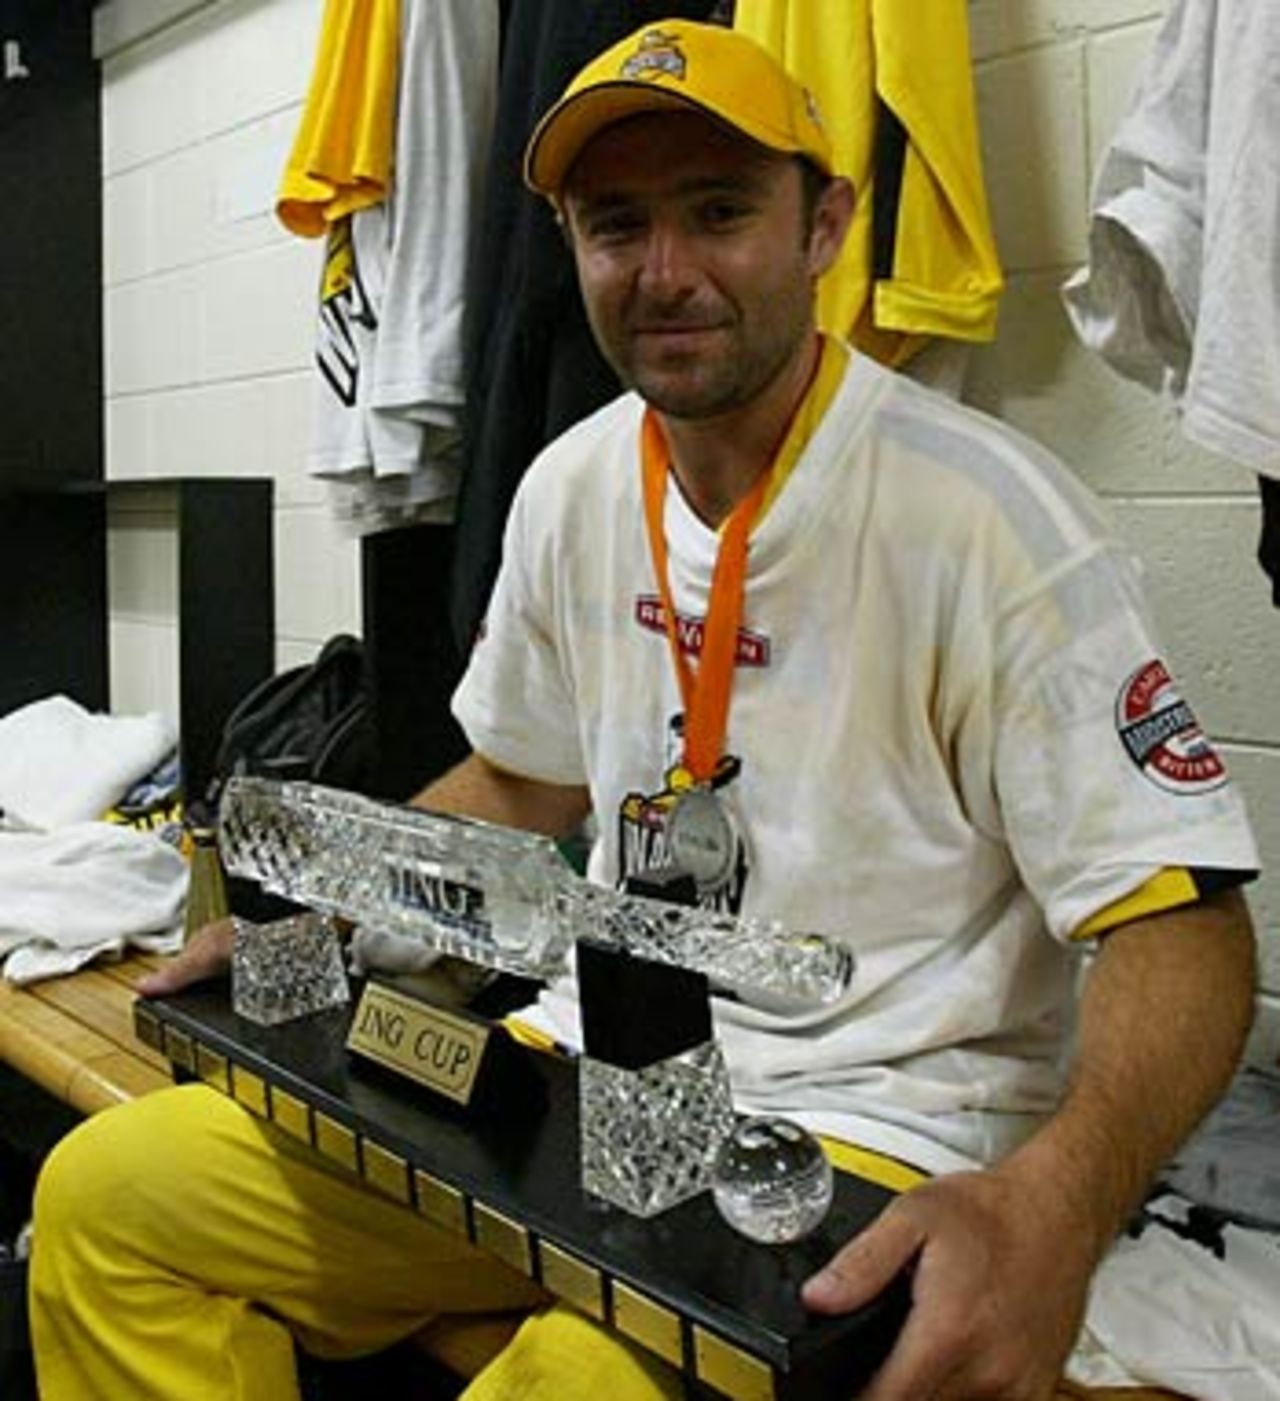 His finest hour ... Kade Harvey with the ING Cup, WA v Queensland, 2003-04